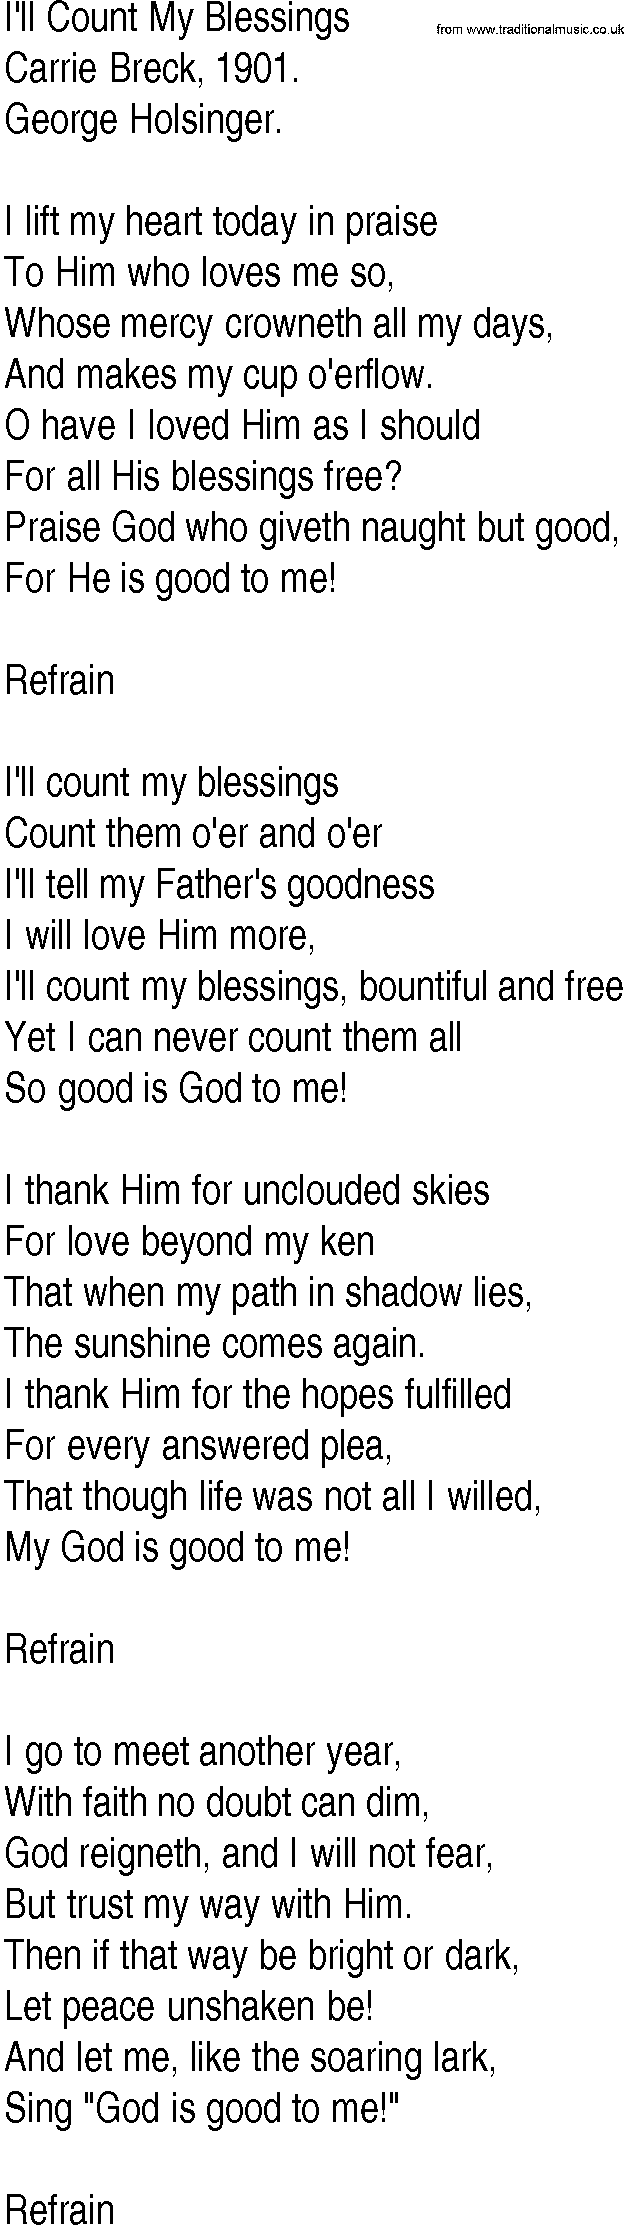 Hymn and Gospel Song: I'll Count My Blessings by Carrie Breck lyrics